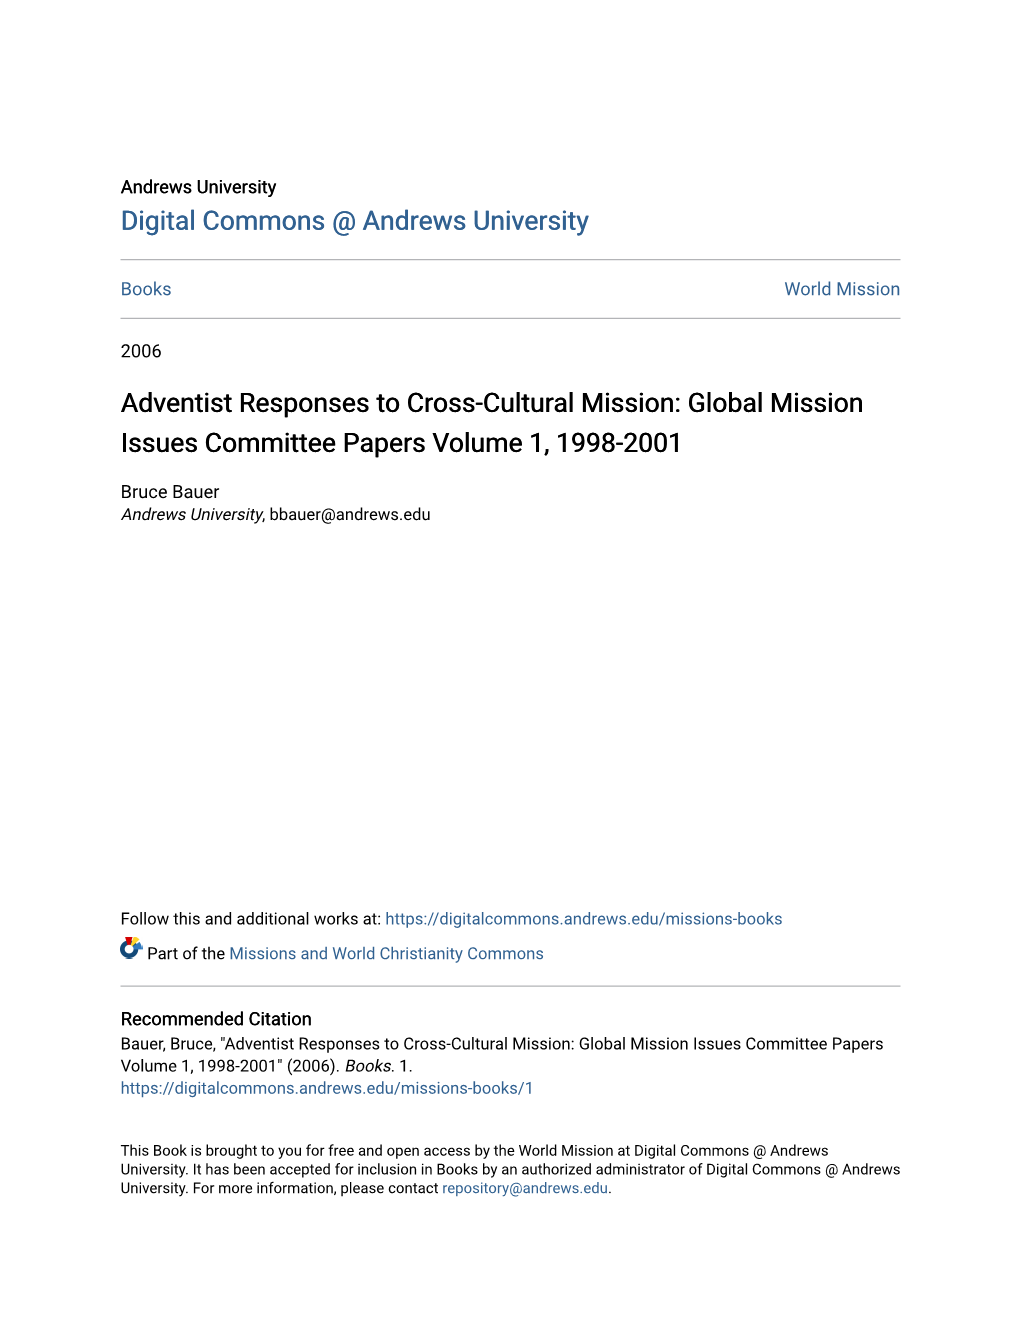 Adventist Responses to Cross-Cultural Mission: Global Mission Issues Committee Papers Volume 1, 1998-2001